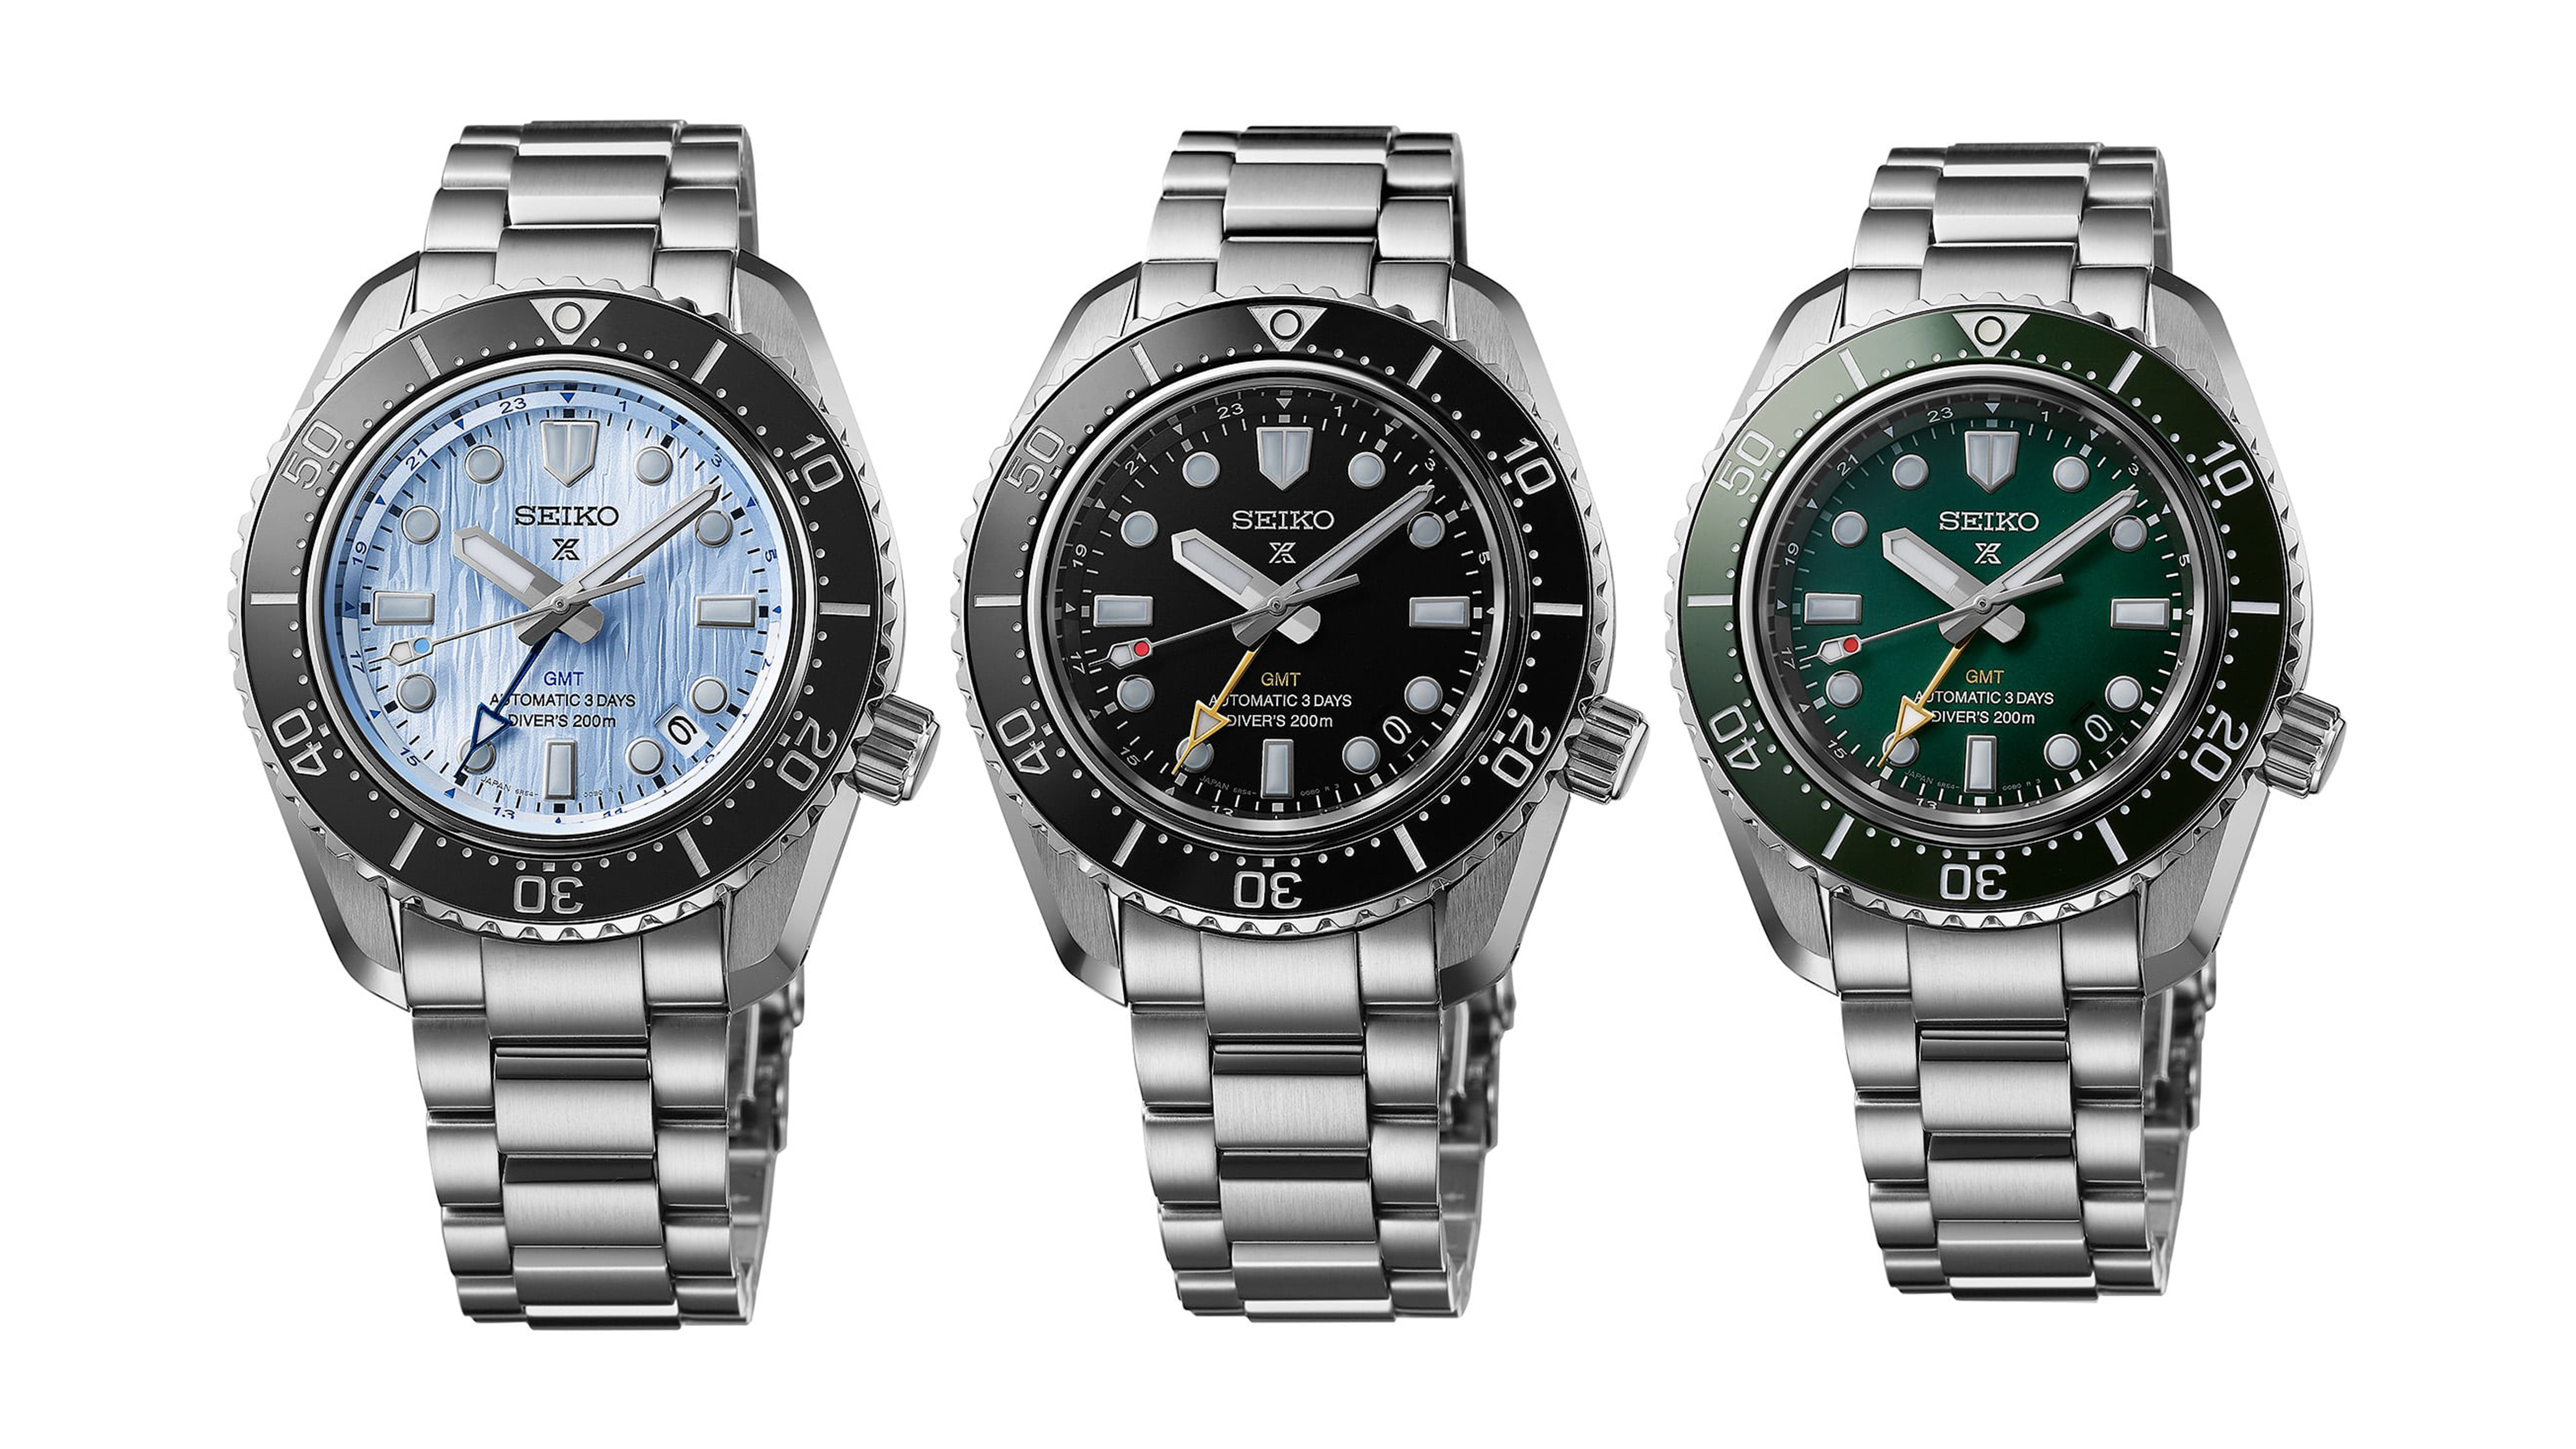 New Seiko Prospex dive watch brings GMT function to a 60s classic | T3